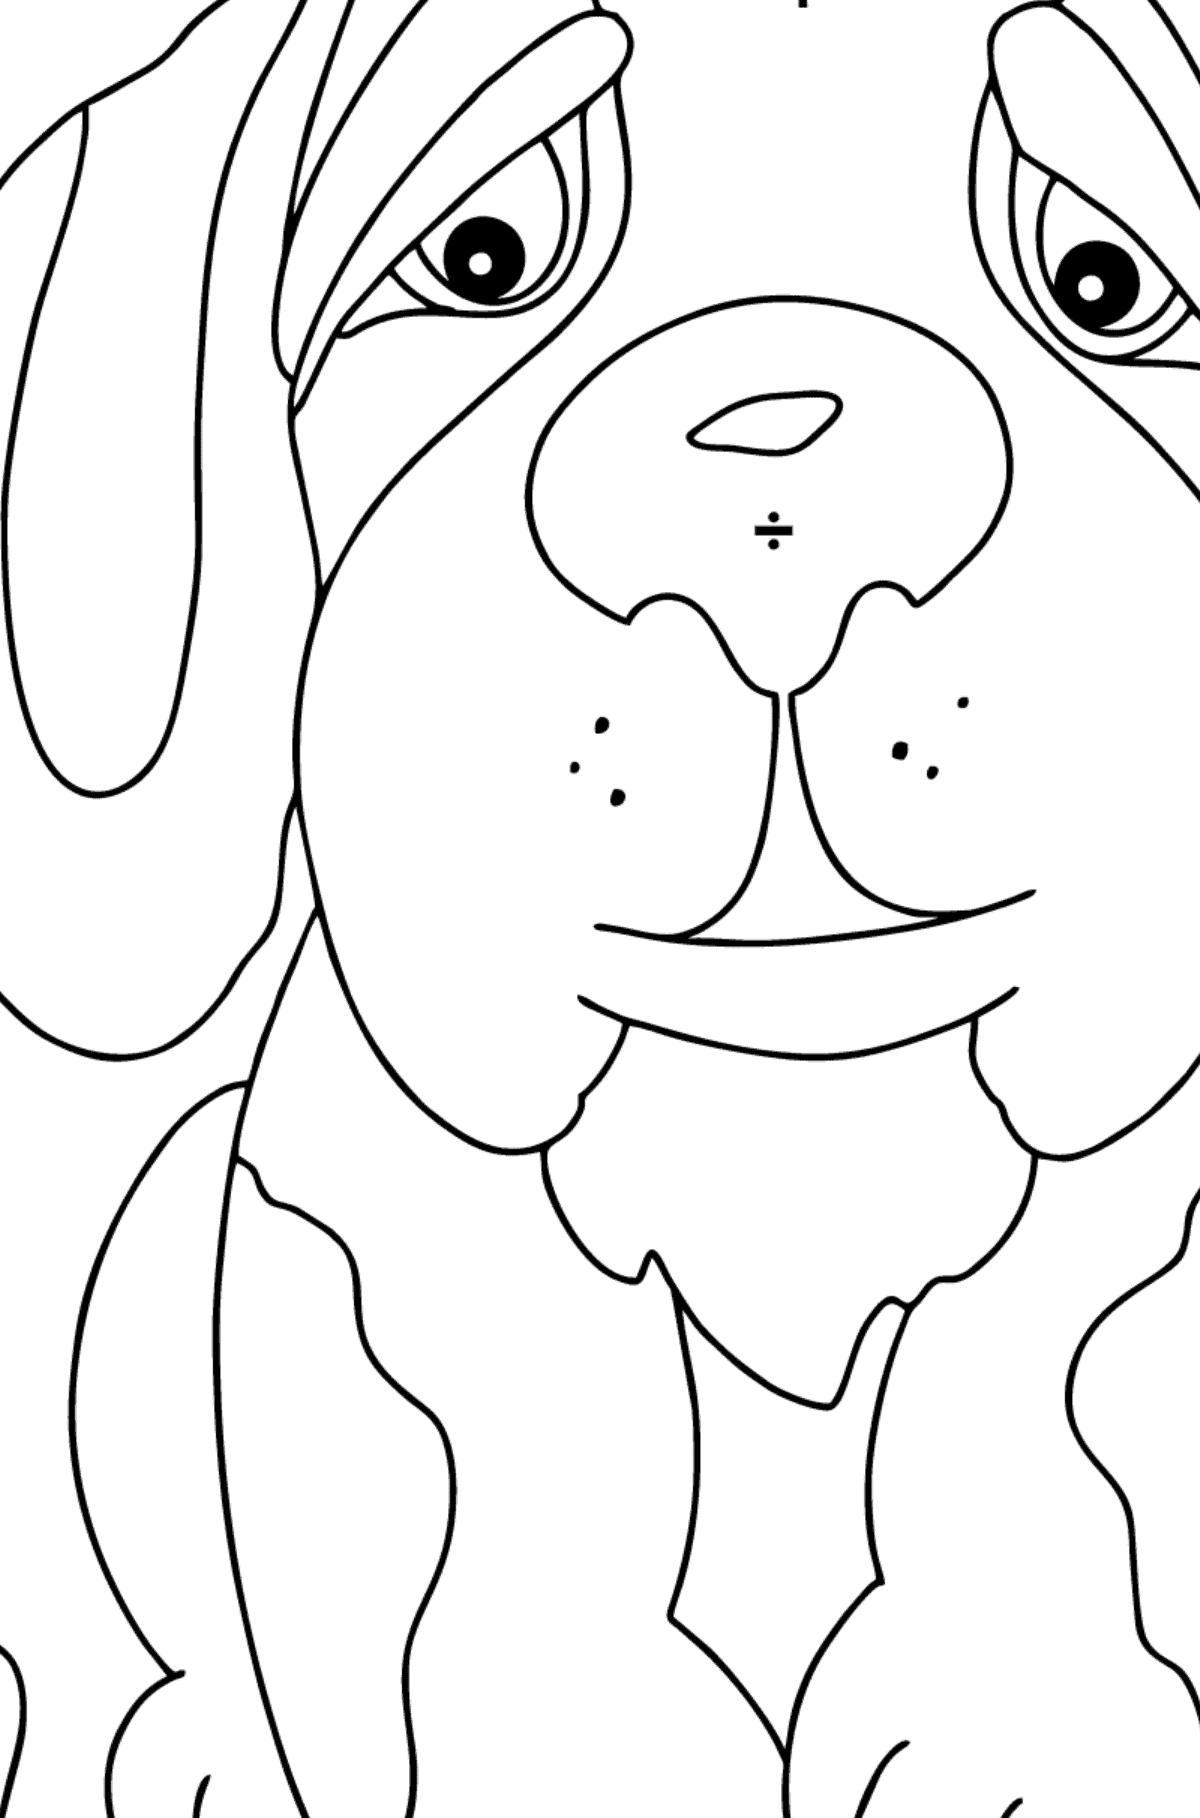 Coloring Page - A Dog is Looking Out a Butterfly for Kids  - Color by Special Symbols